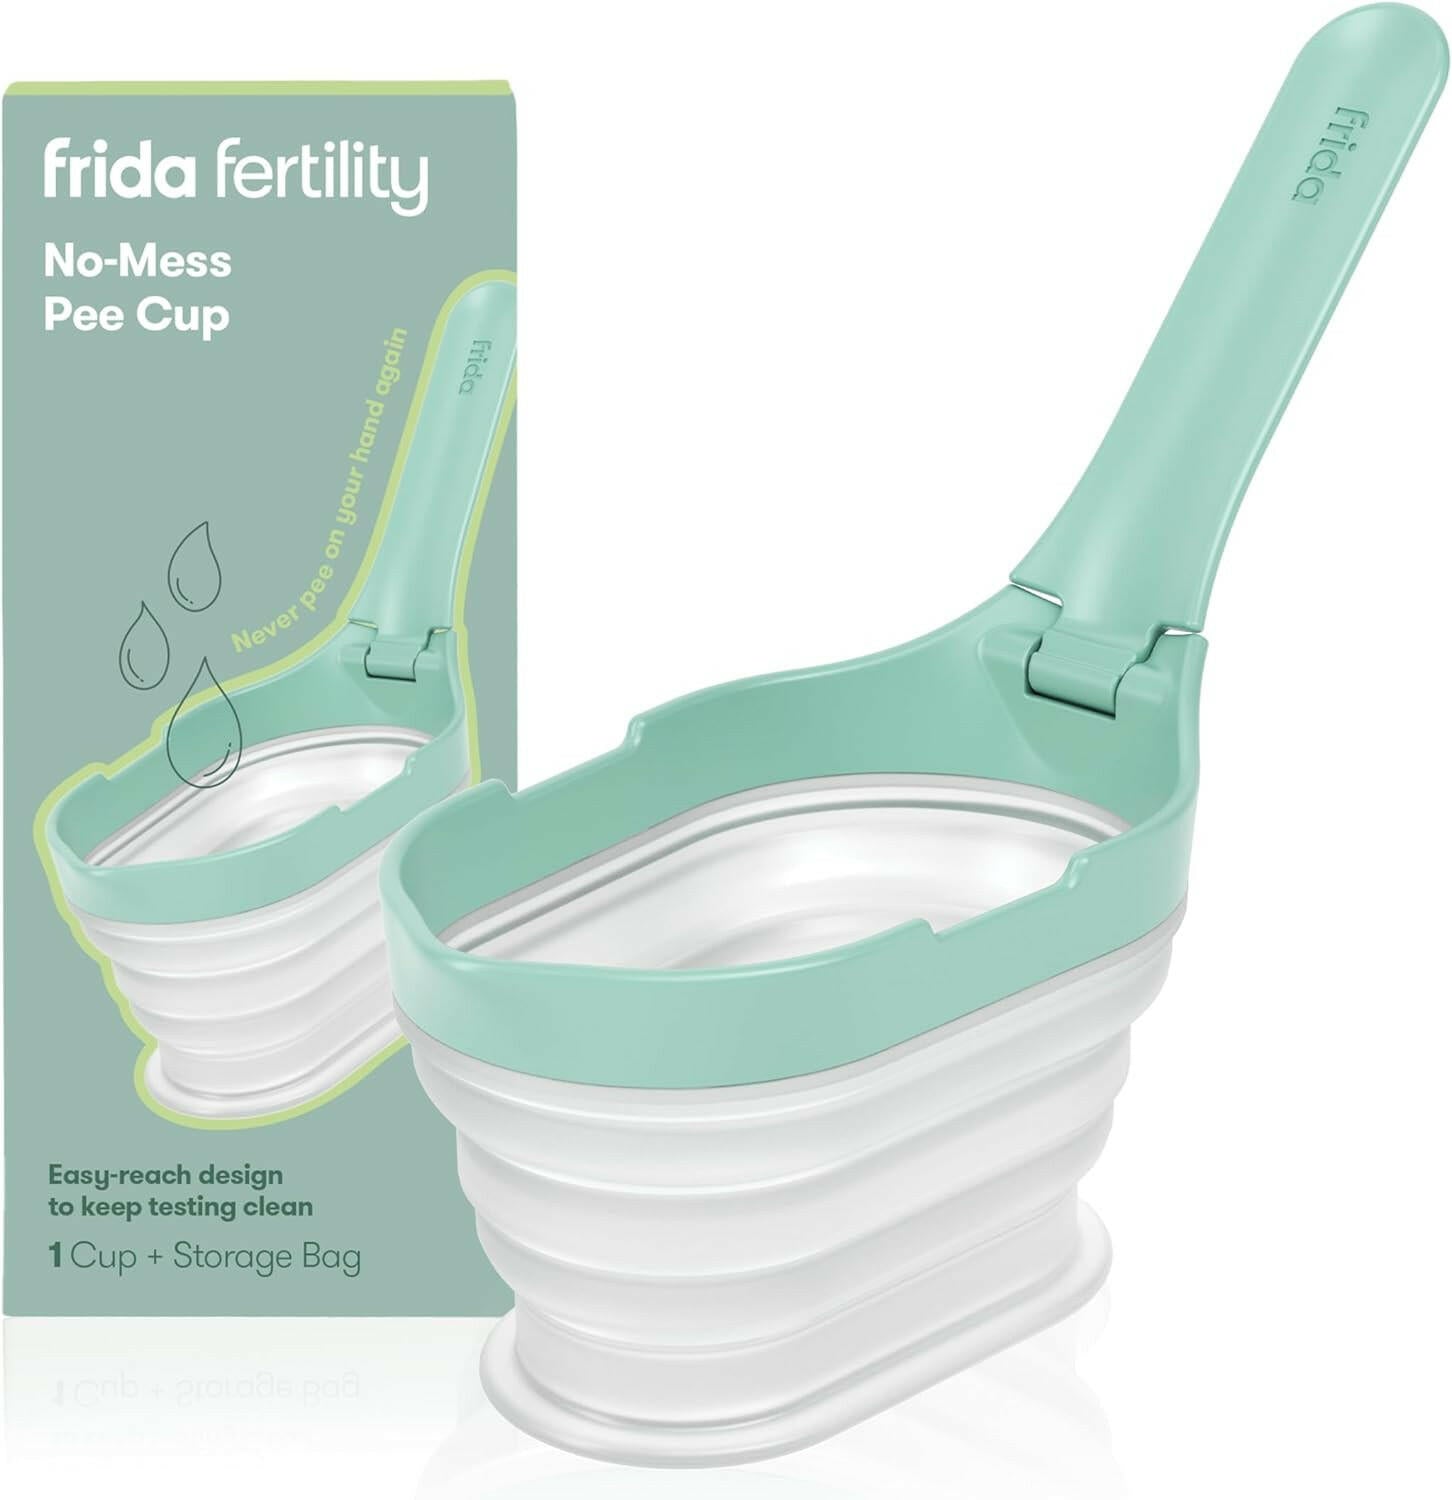 Frida Fertility No-Mess Pee Cup, Reusable Essential for Pregnancy Tests,Portable Urine Sample Cup +Storage Bag